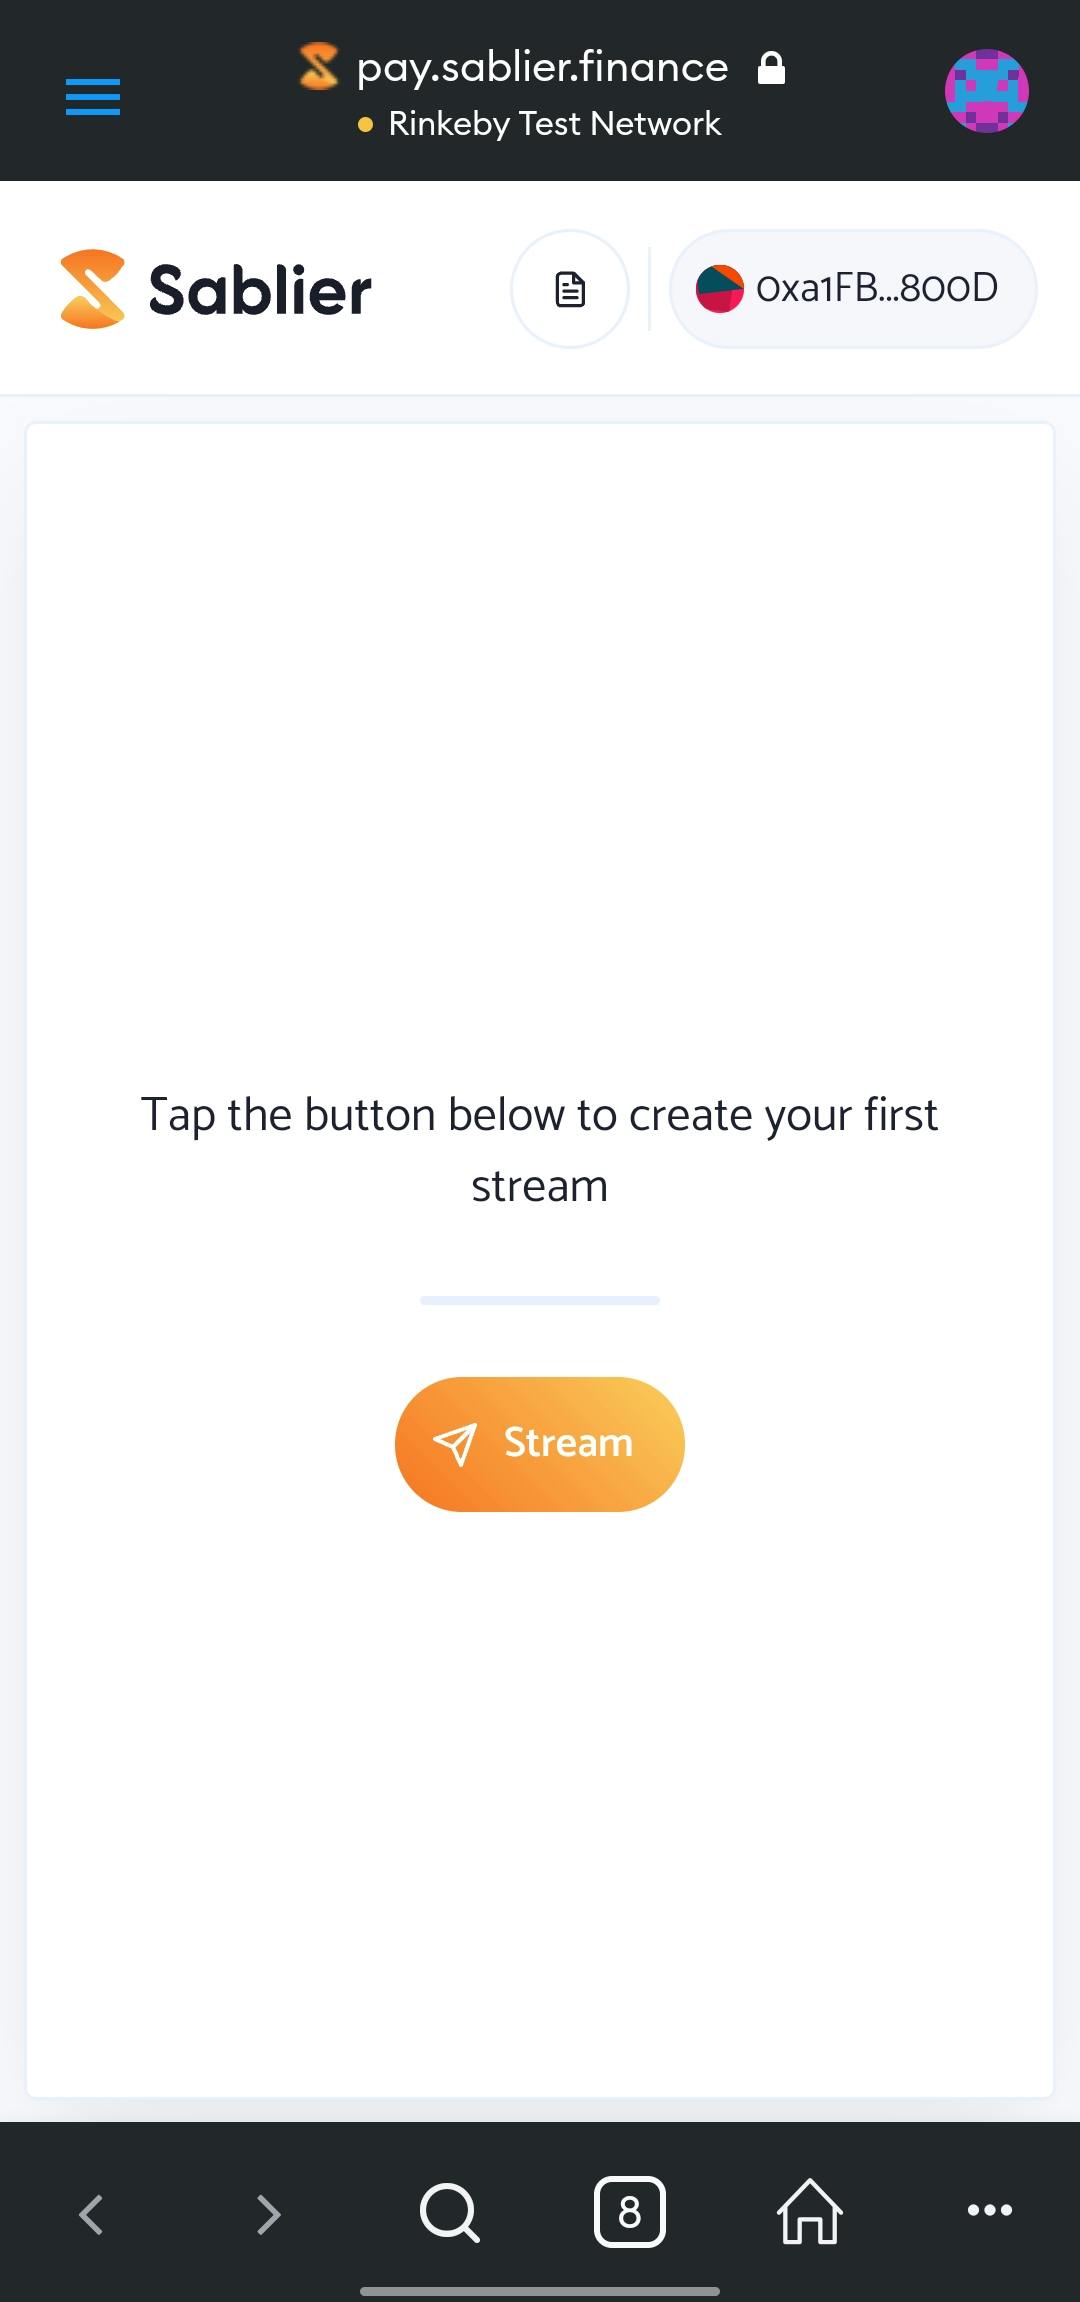 Click the Stream button to start streaming income.